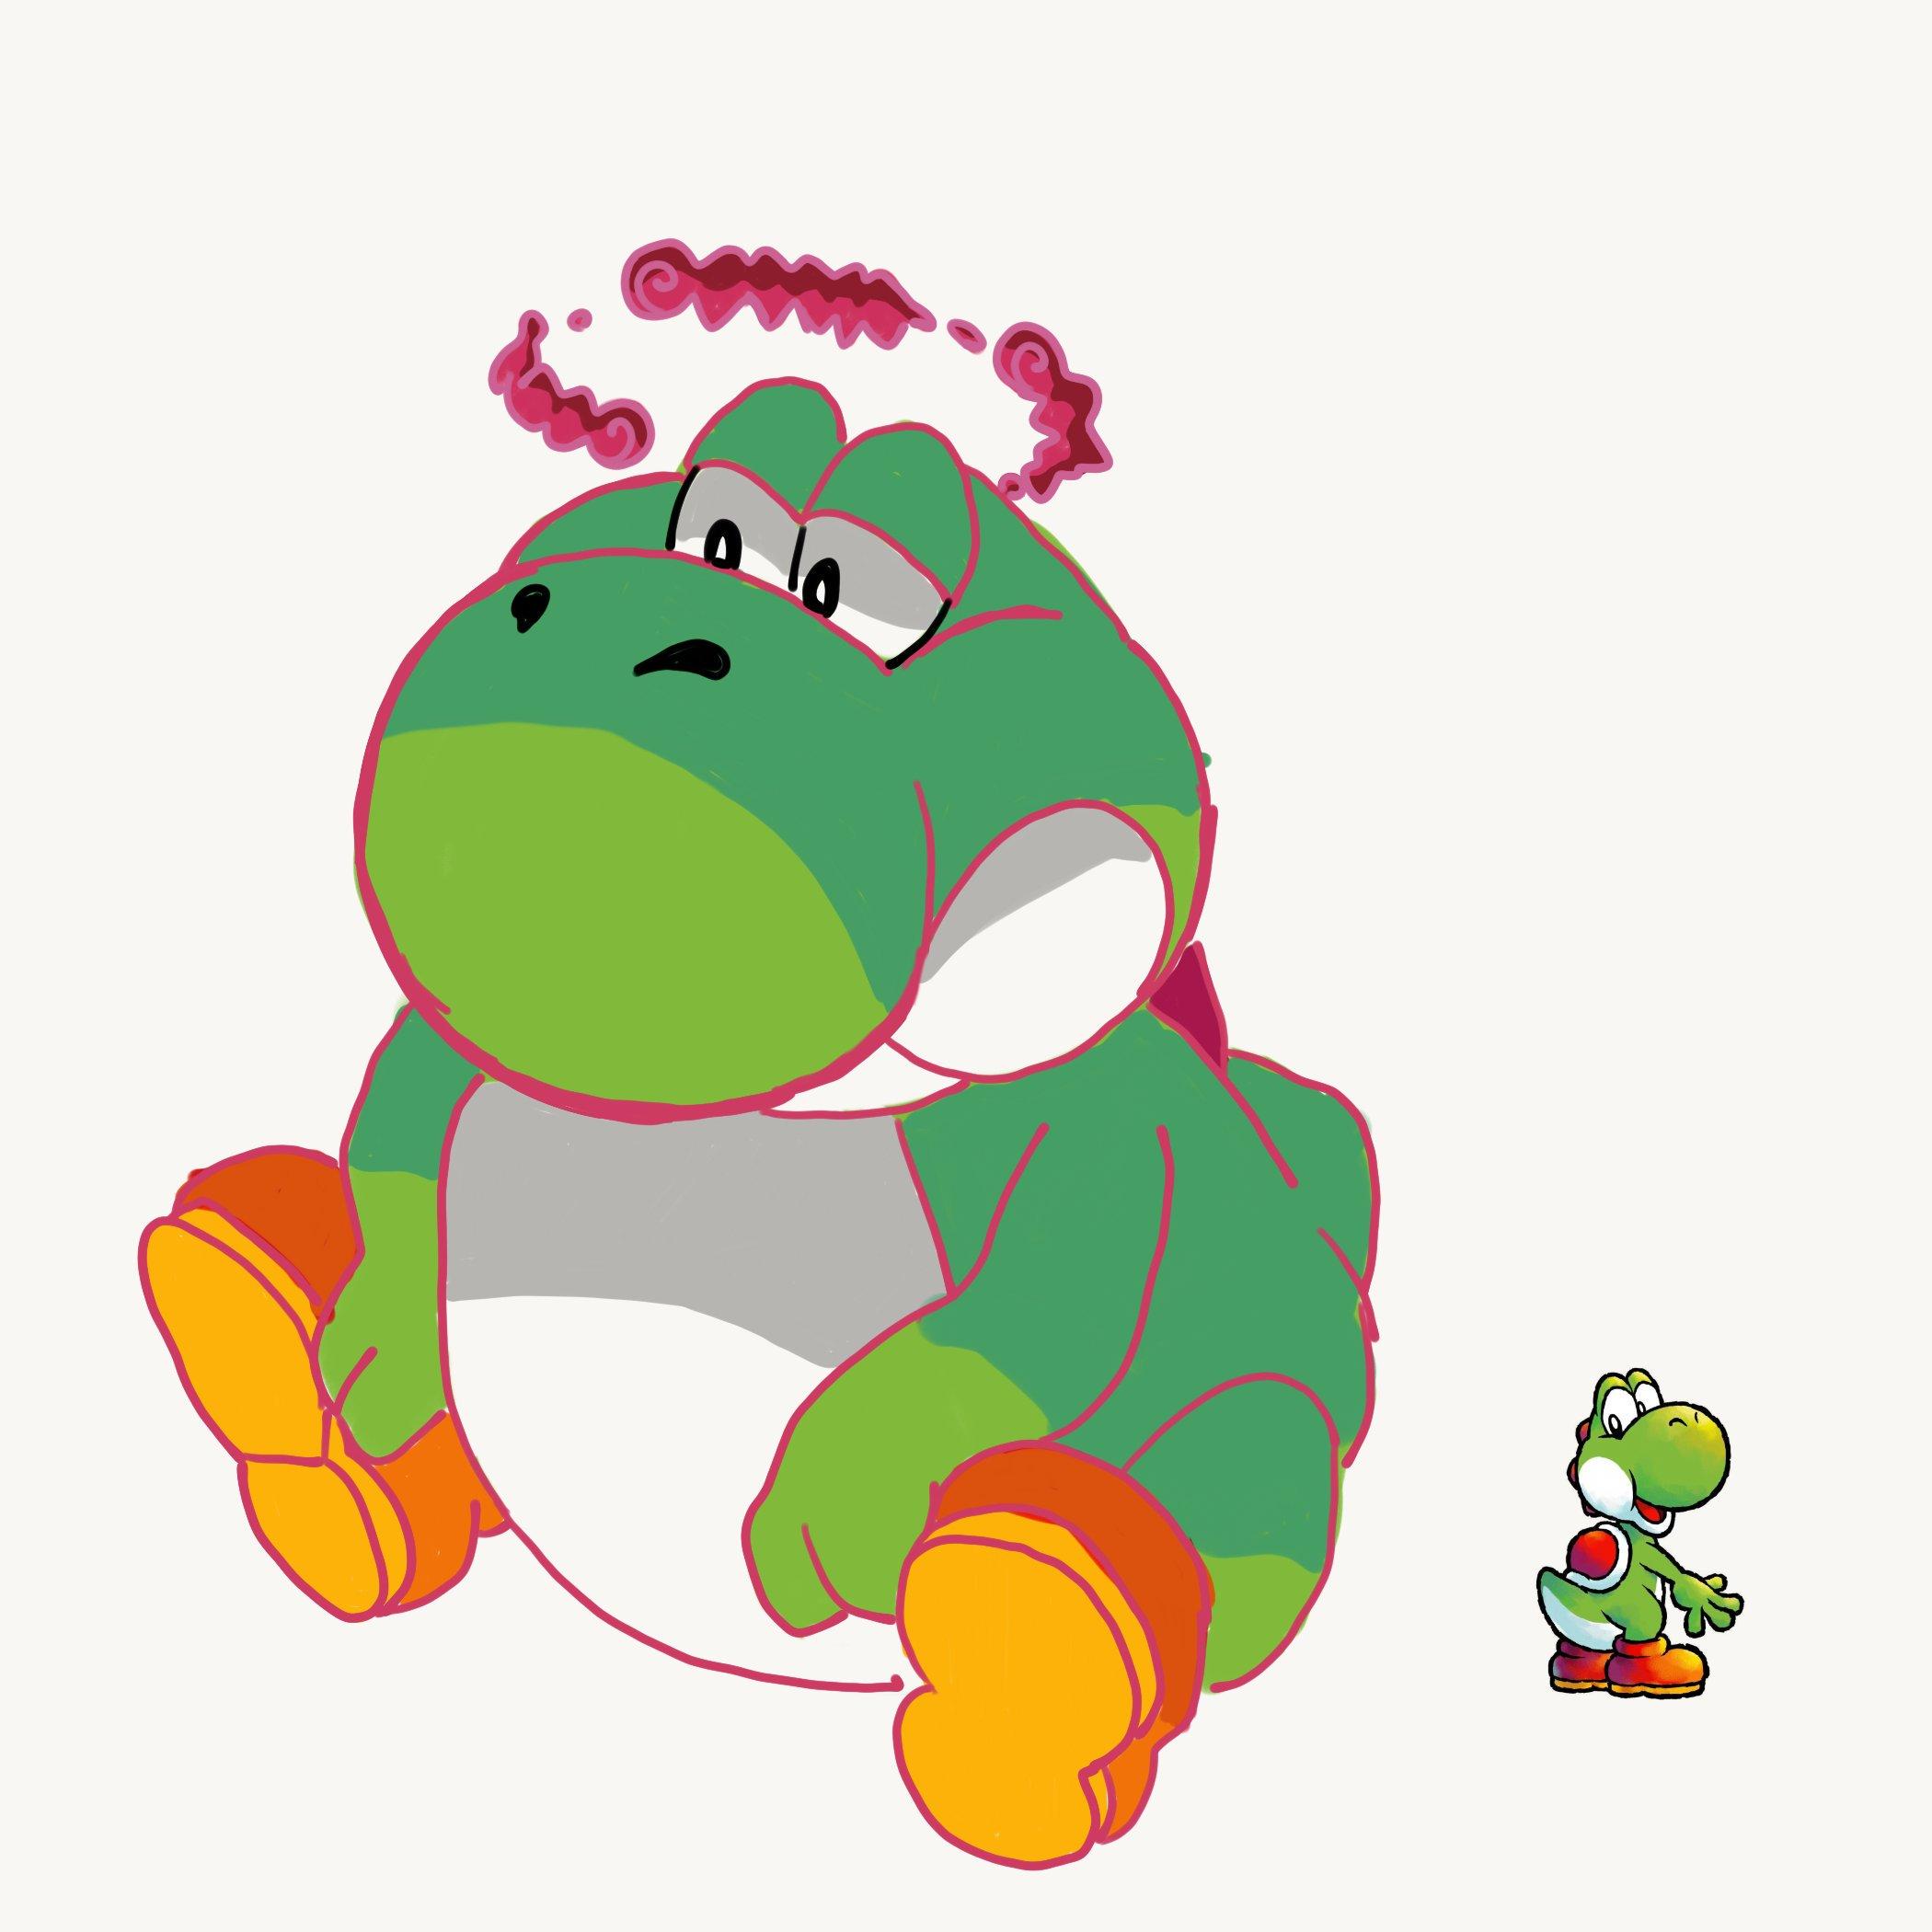 These Pokemon leaks are getting out of hand. Fat Yoshi